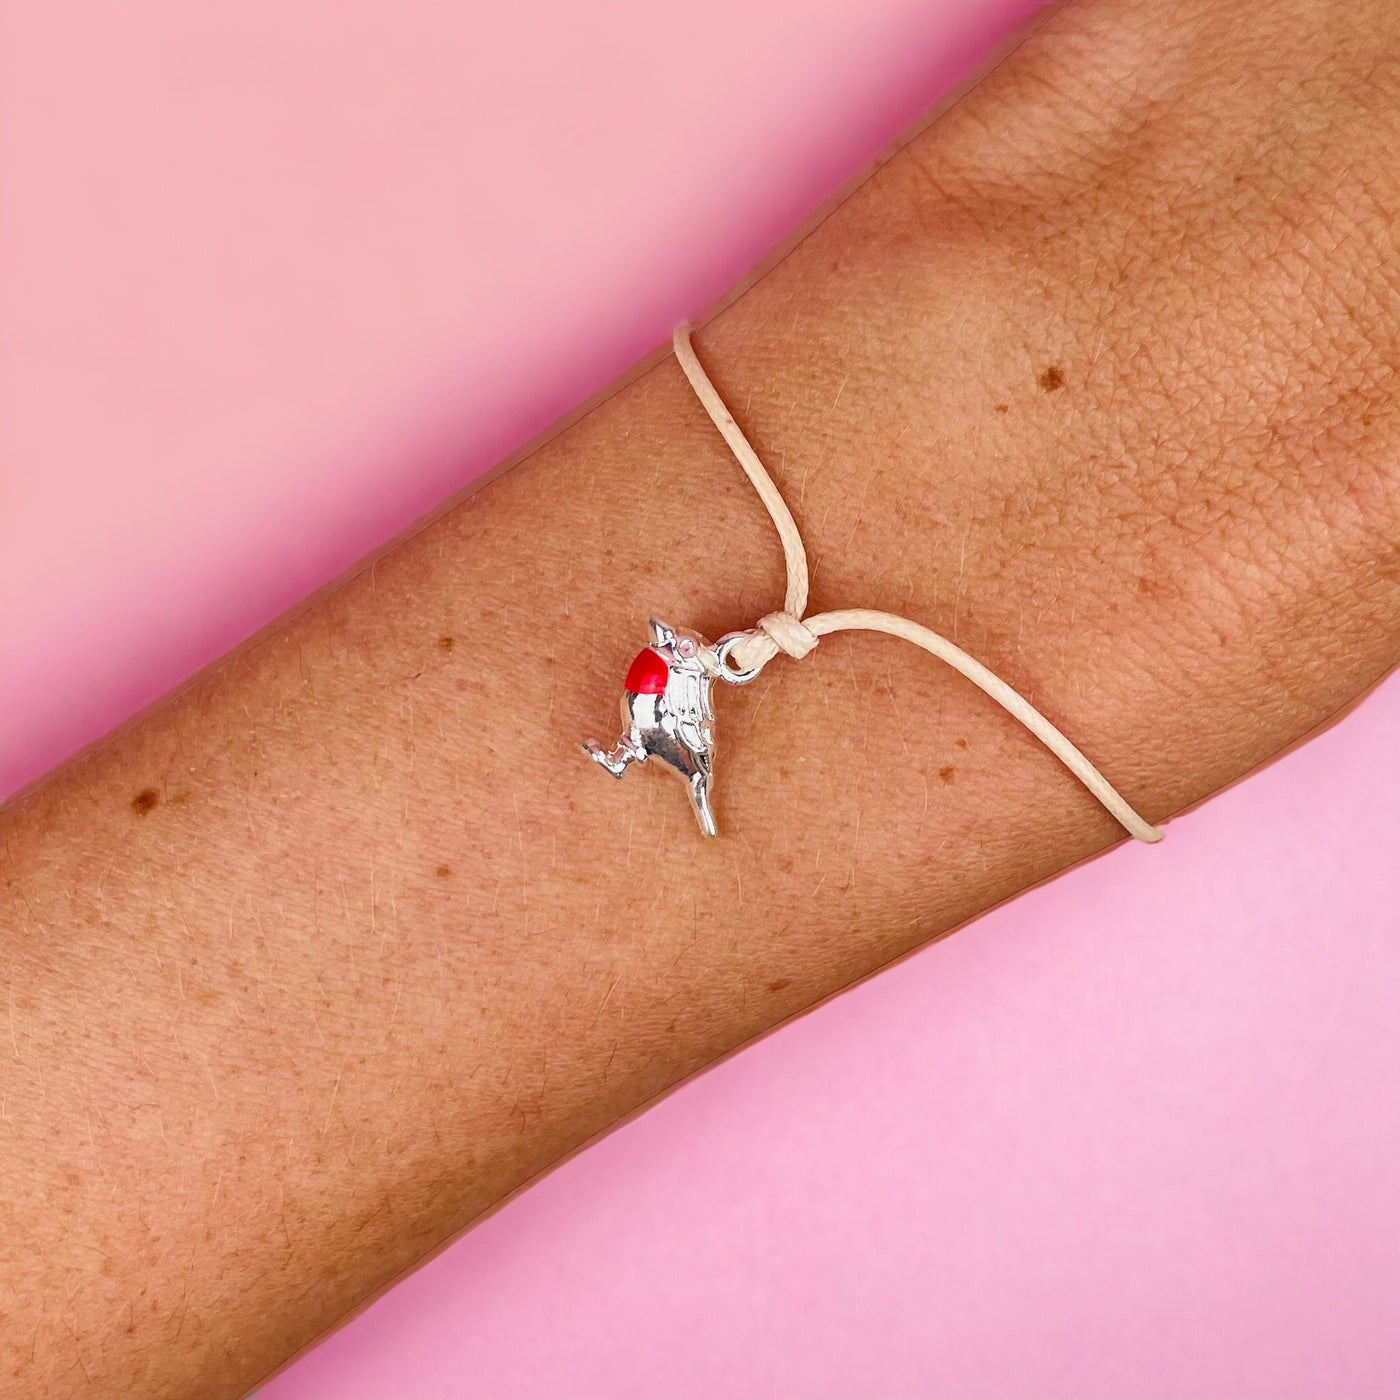 A delicate bracelet with a single, intricately crafted robin charm, featuring a red breast, perched on a soft, natural beige cord against a person's wrist.